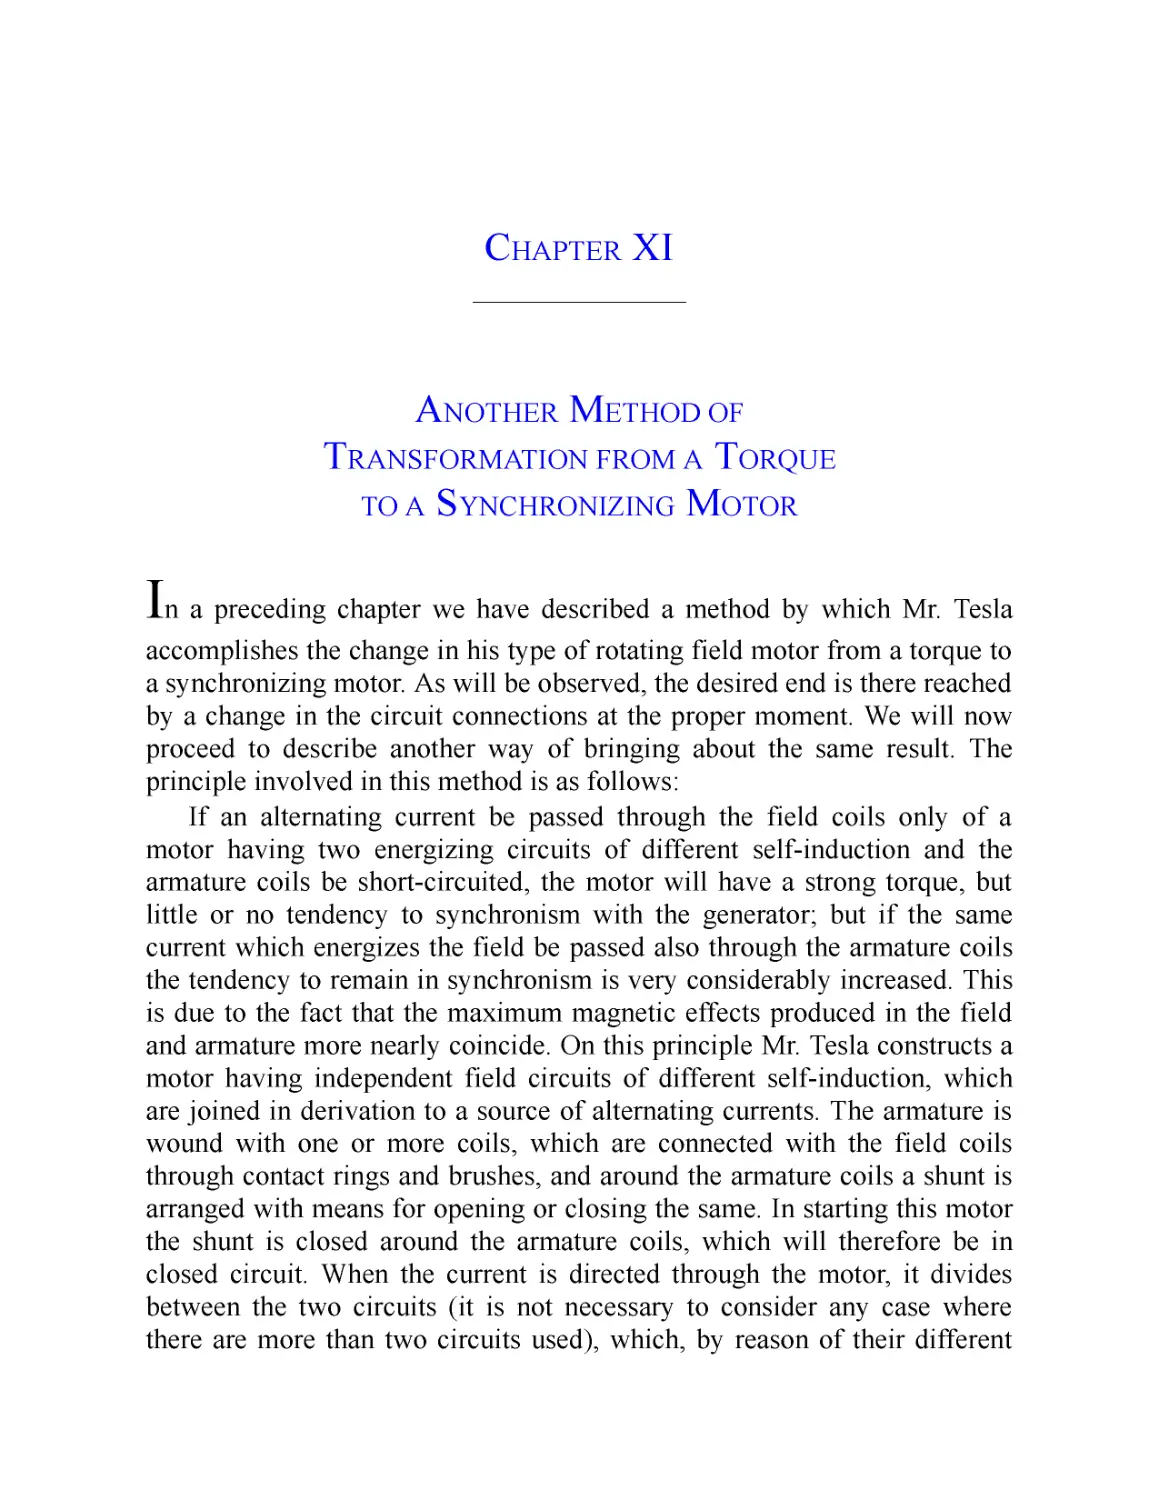 ﻿Chapter XI: Another Method of Transformation from a Torque to a Synchronizing Moto